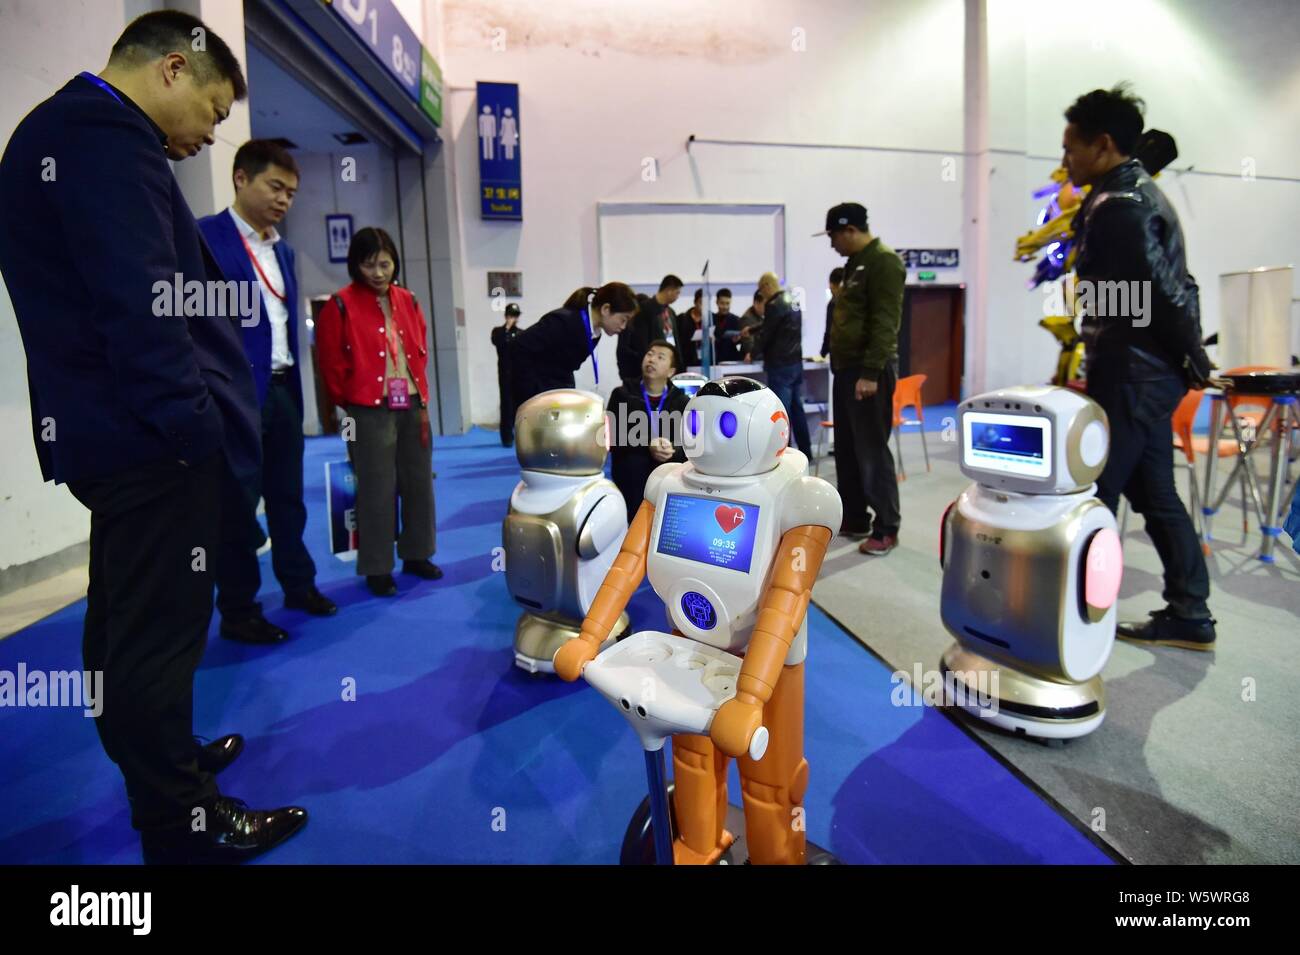 Robots are on display during the 5th China Yiwu International Manufacturing Equipment Expo in Yiwu city, Jinhua city, east China's Zhejiang province, Stock Photo